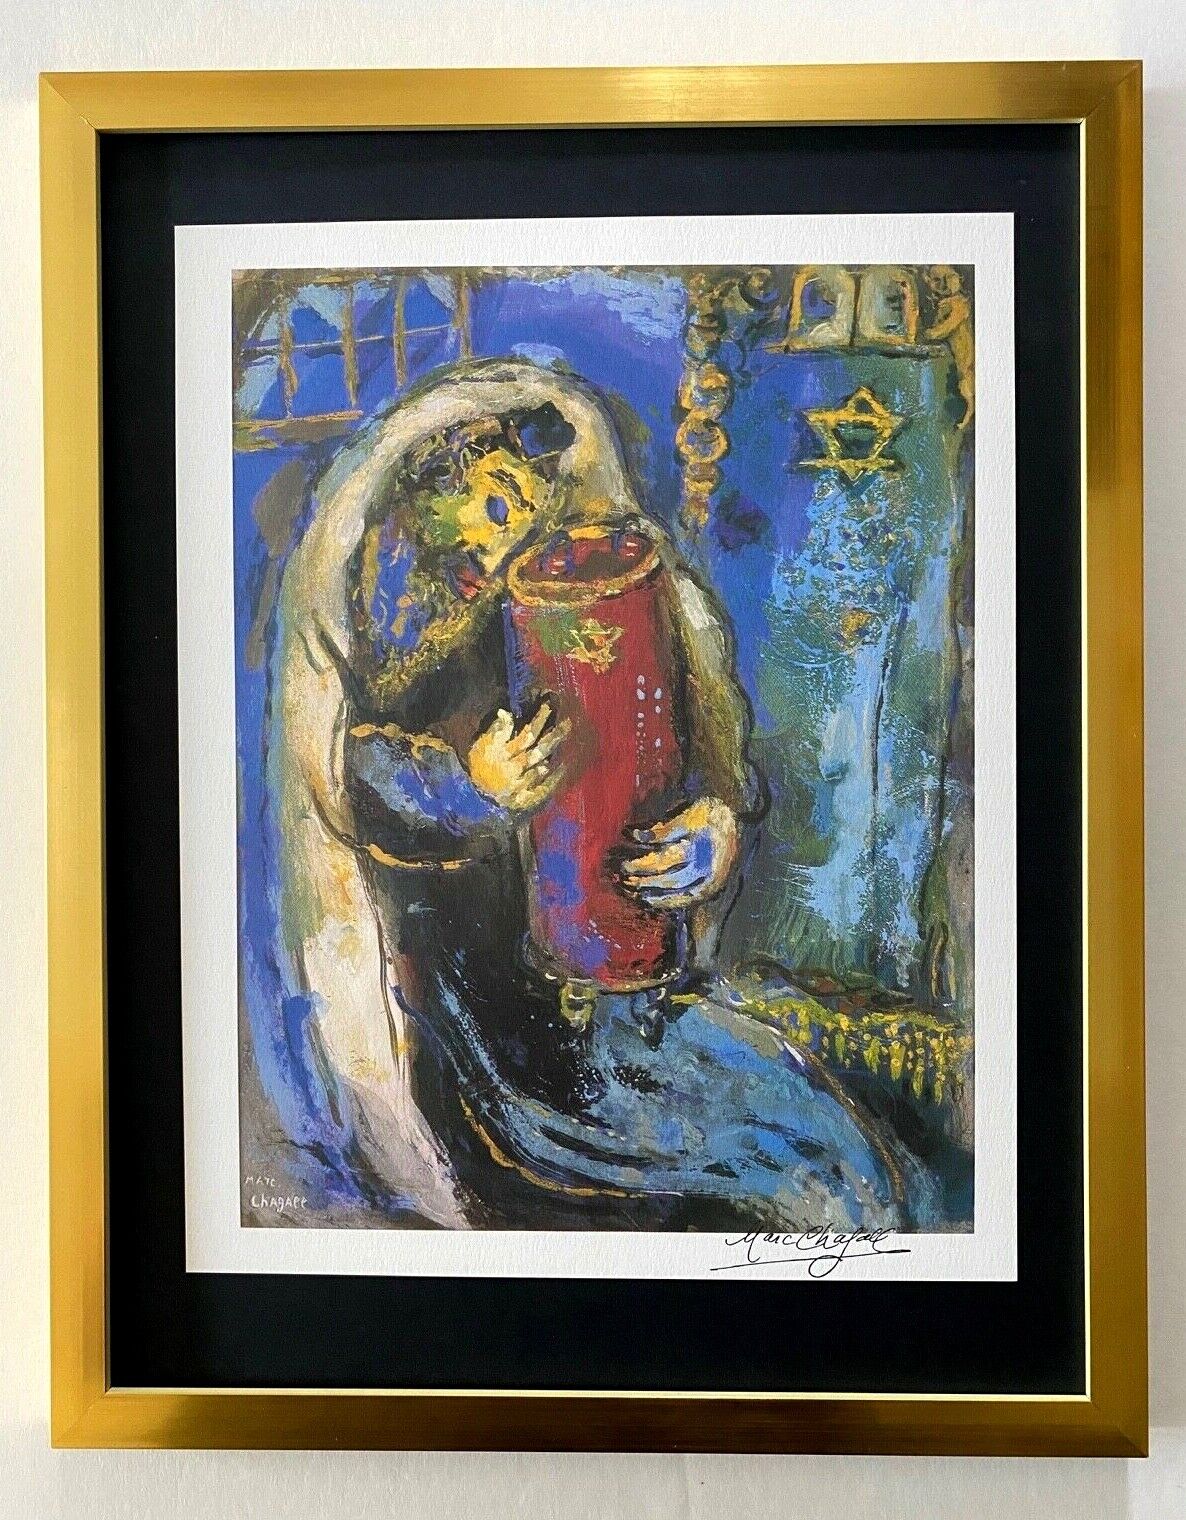 MARC CHAGALL | ORIGINAL VINTAGE 1975 PRINT | SIGNED | MOUNTED IN 11X14 BOARD